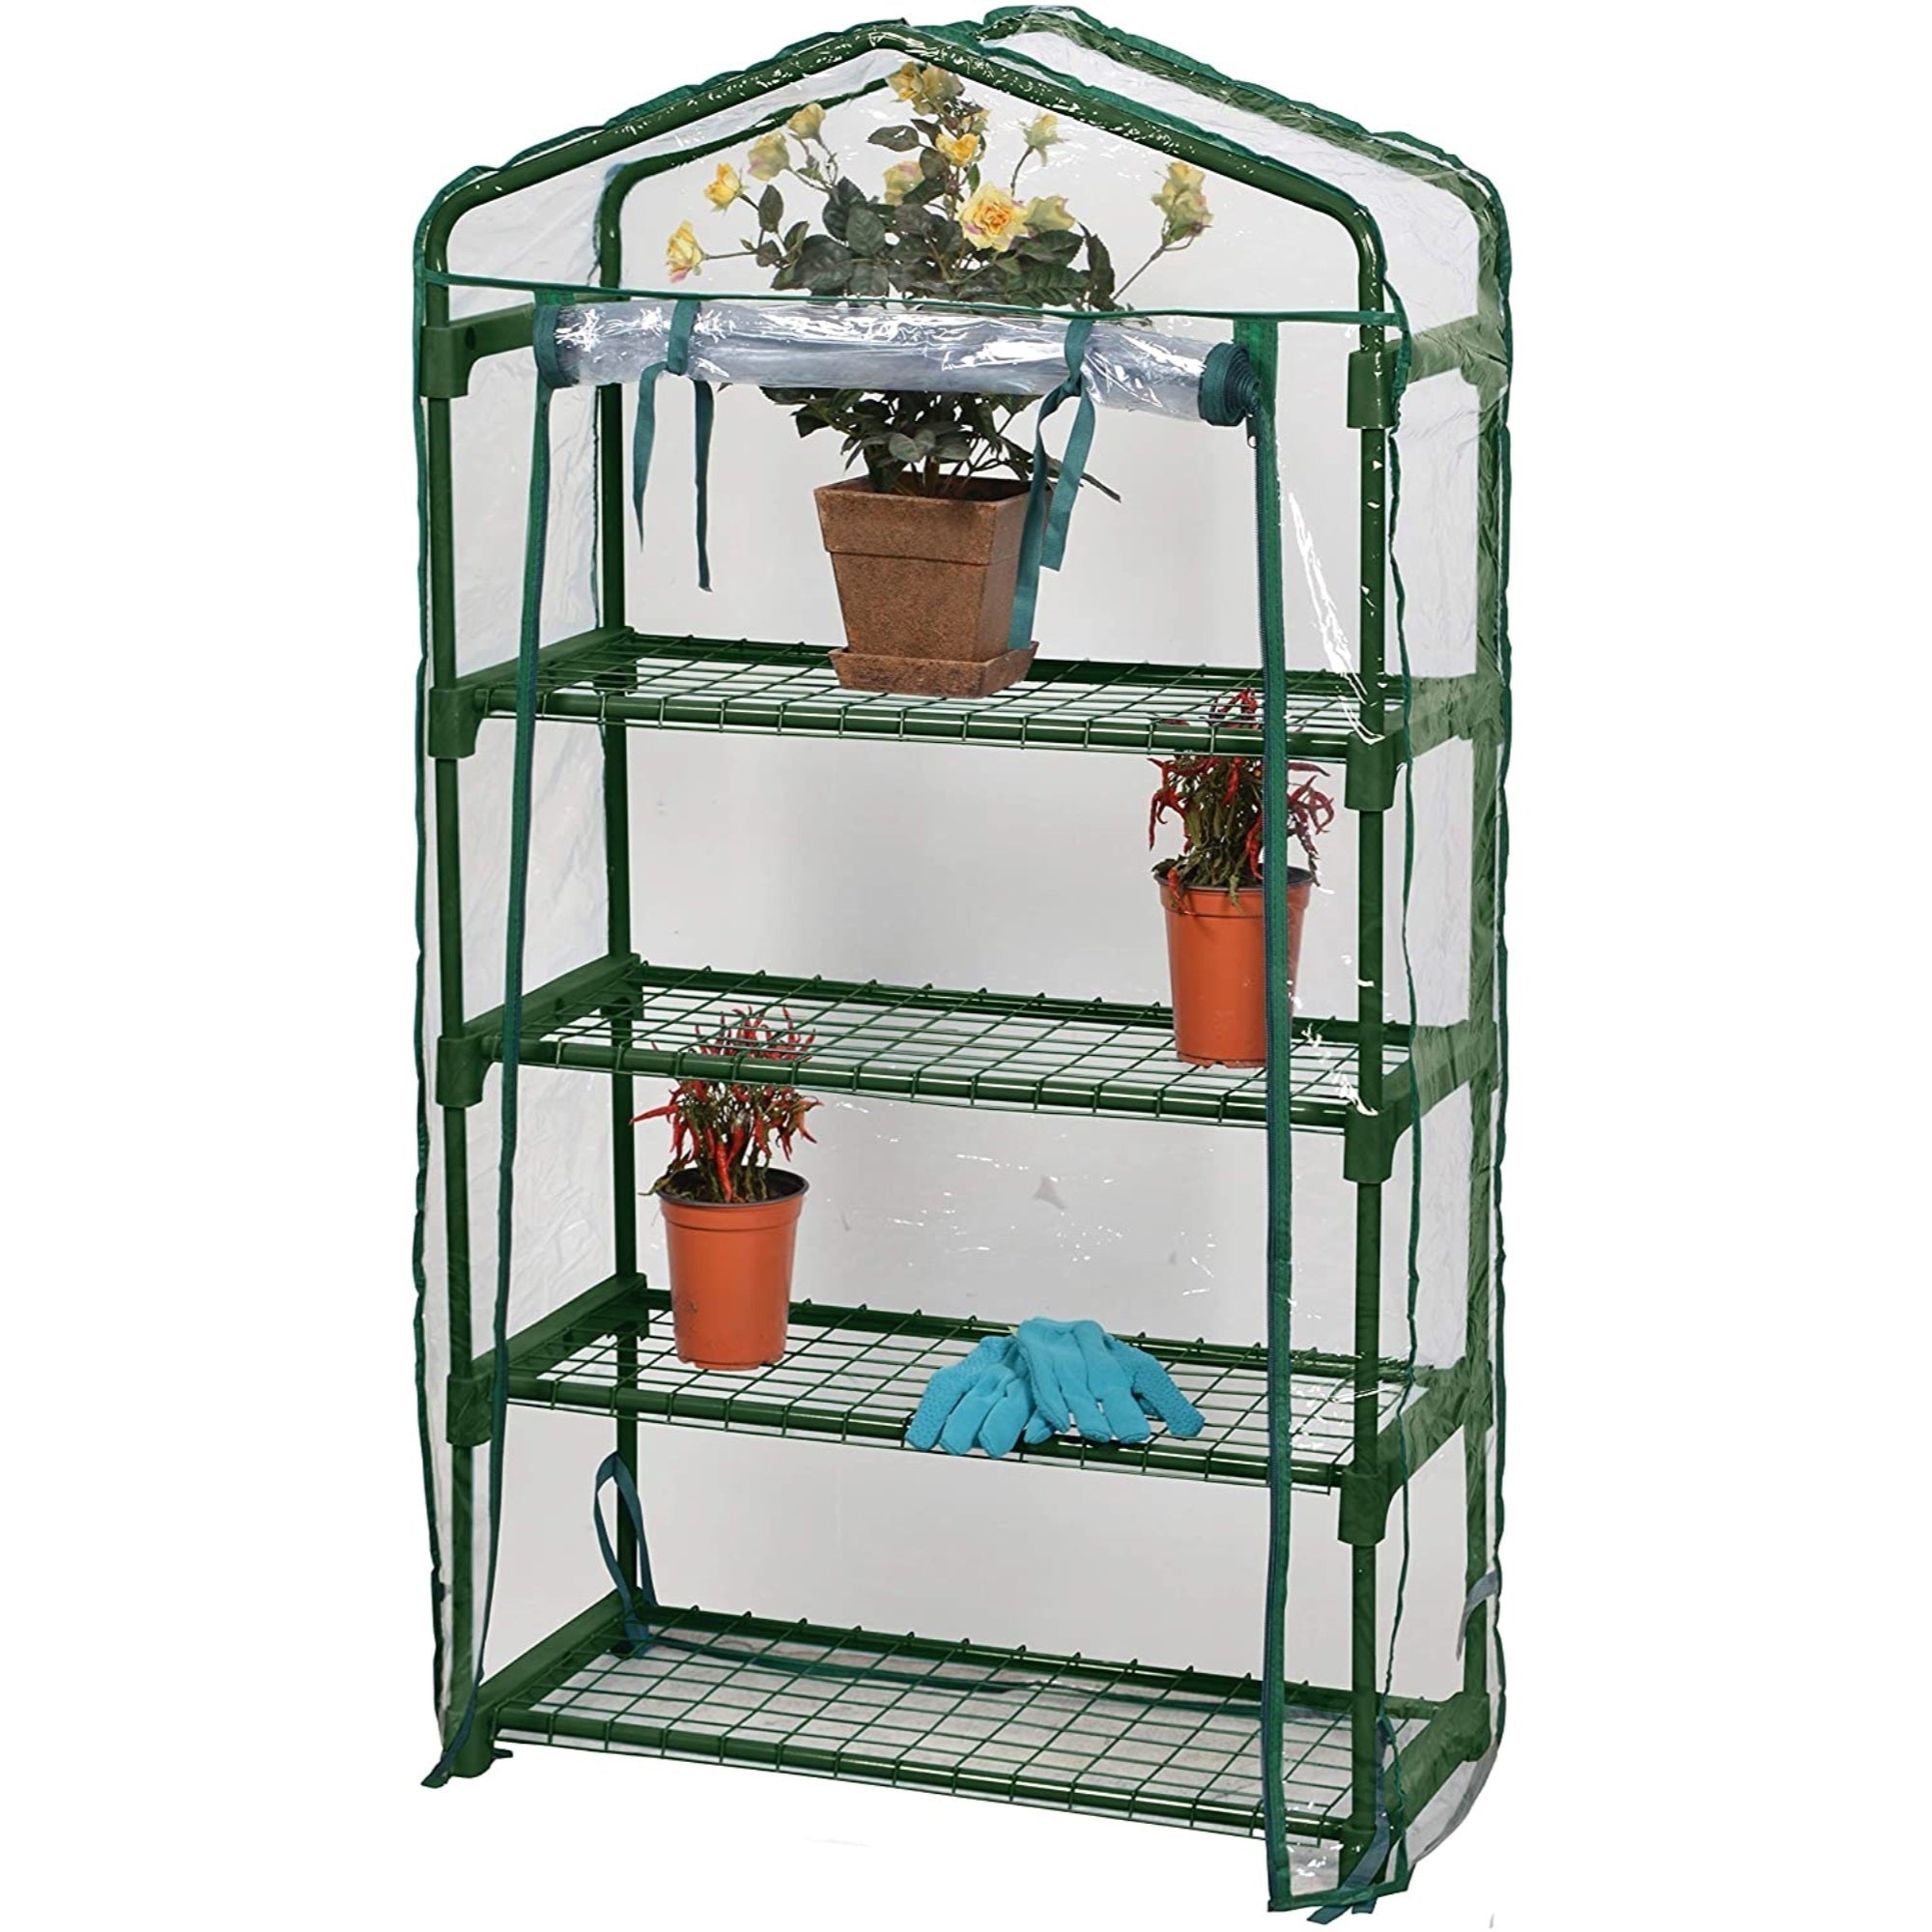 Bloom Personal Plastic Indoor/Outdoor 4-Tier Standing Greenhouse For Seed Starting and Propagation, Frost Protection, Clear, Small, 27" x 12" x 49"